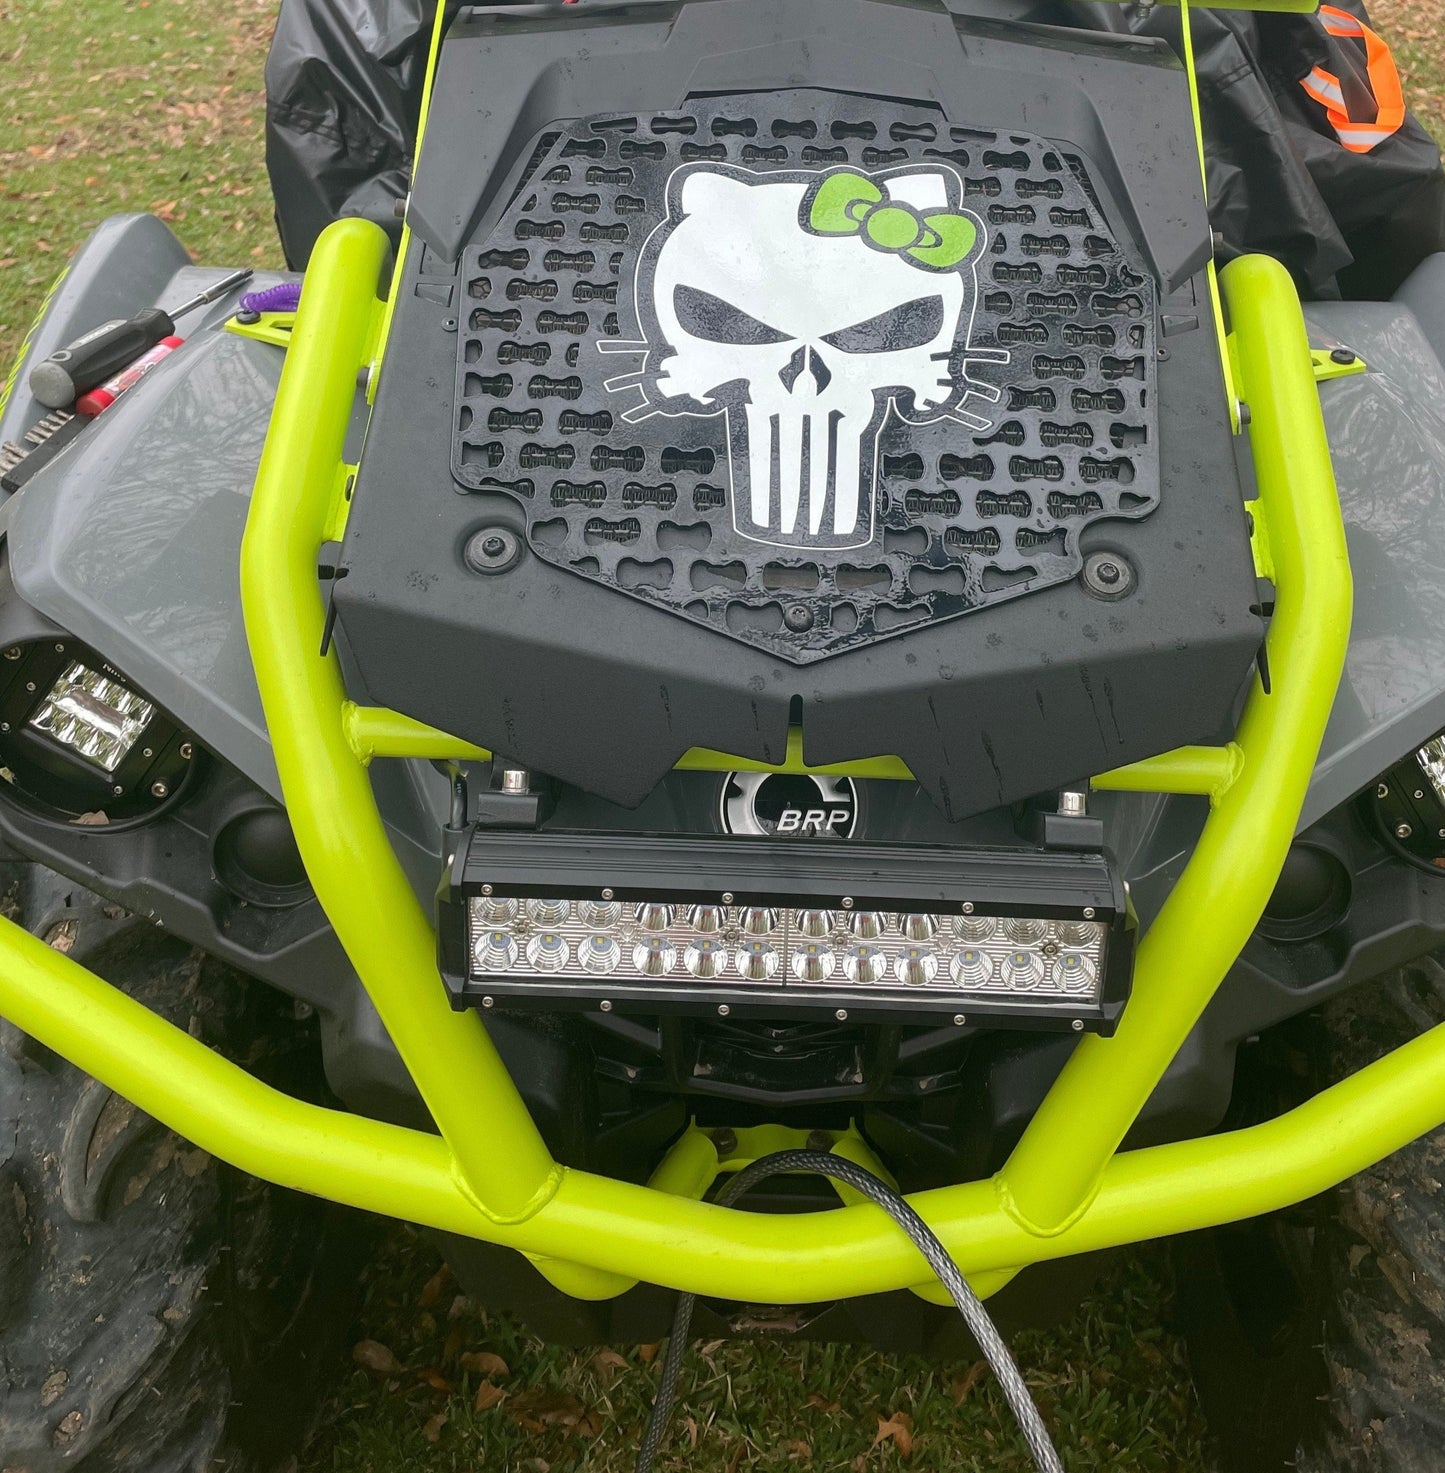 Kitty Punisher-Bad Kitty- Cover for Radiator on Can Am Outlander Max XMR 450 570 650 850 1000